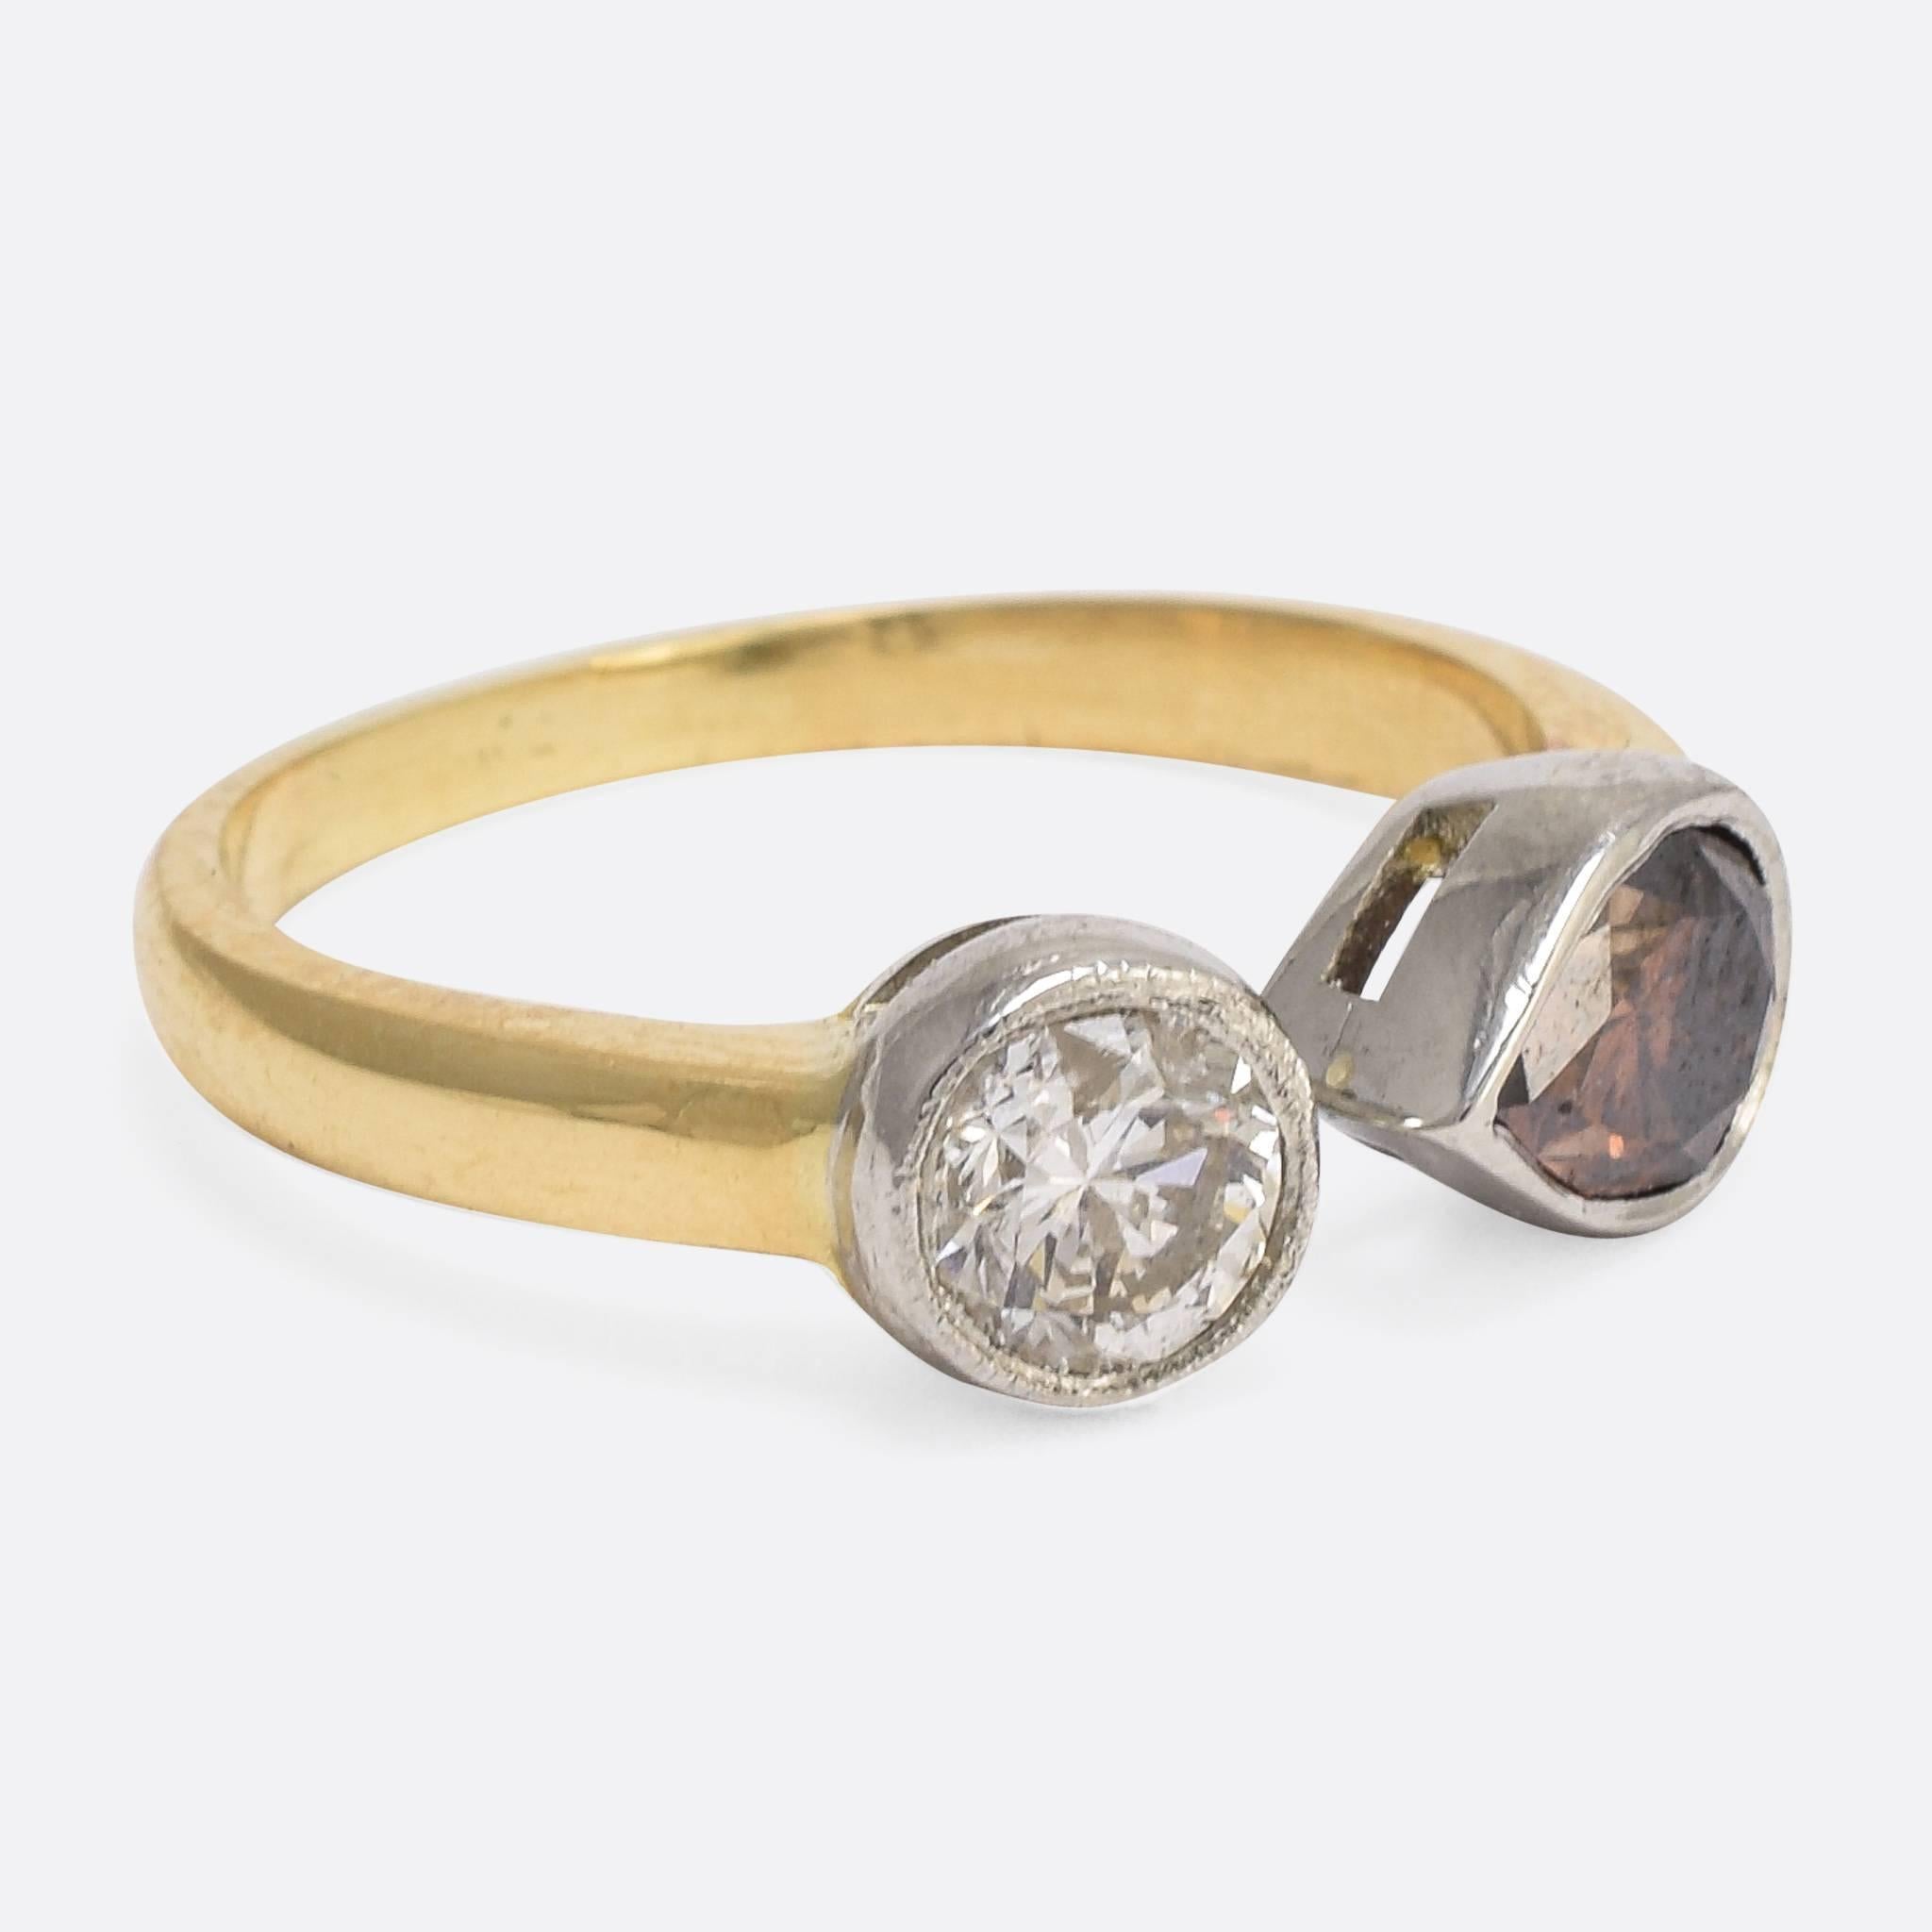 We have set these outstanding diamonds in a contemporary "Toi et Moi" ring mount of our own design. The pear cut stone weighs 1.2ct with a lovely cognac brown colour; while the .54ct brilliant cut diamond shows excellent clarity and